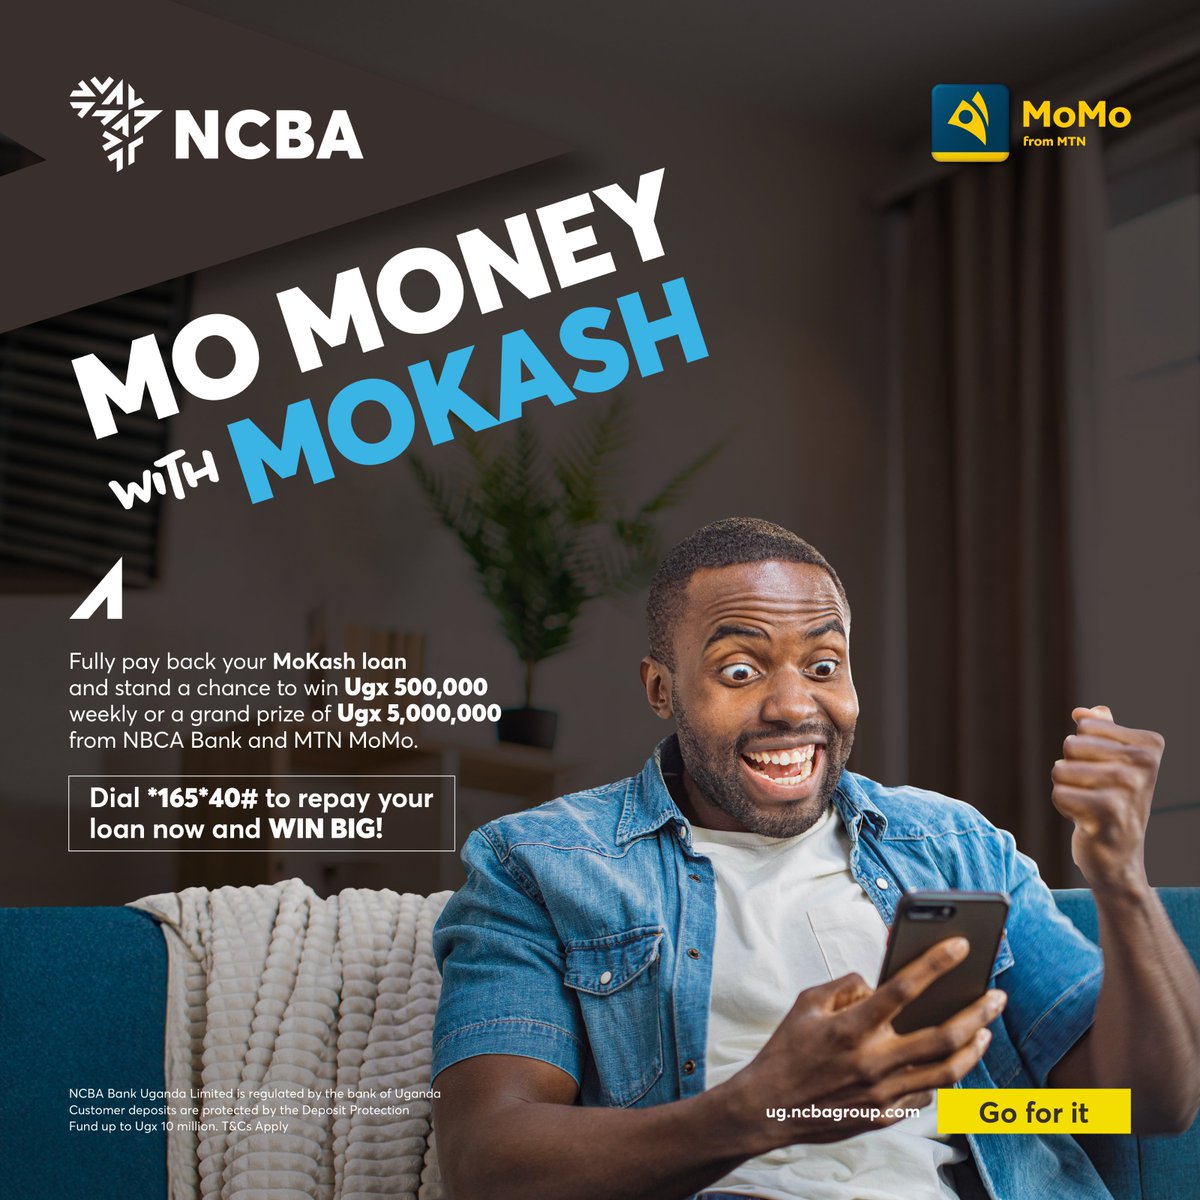 Repay, Relax, and Reap! Fully repay your MoKash loan and stand a chance to win big cash prizes. Join the fun today and make your money work for you. 🎉 #WinMoWithMoKash 
#goforit